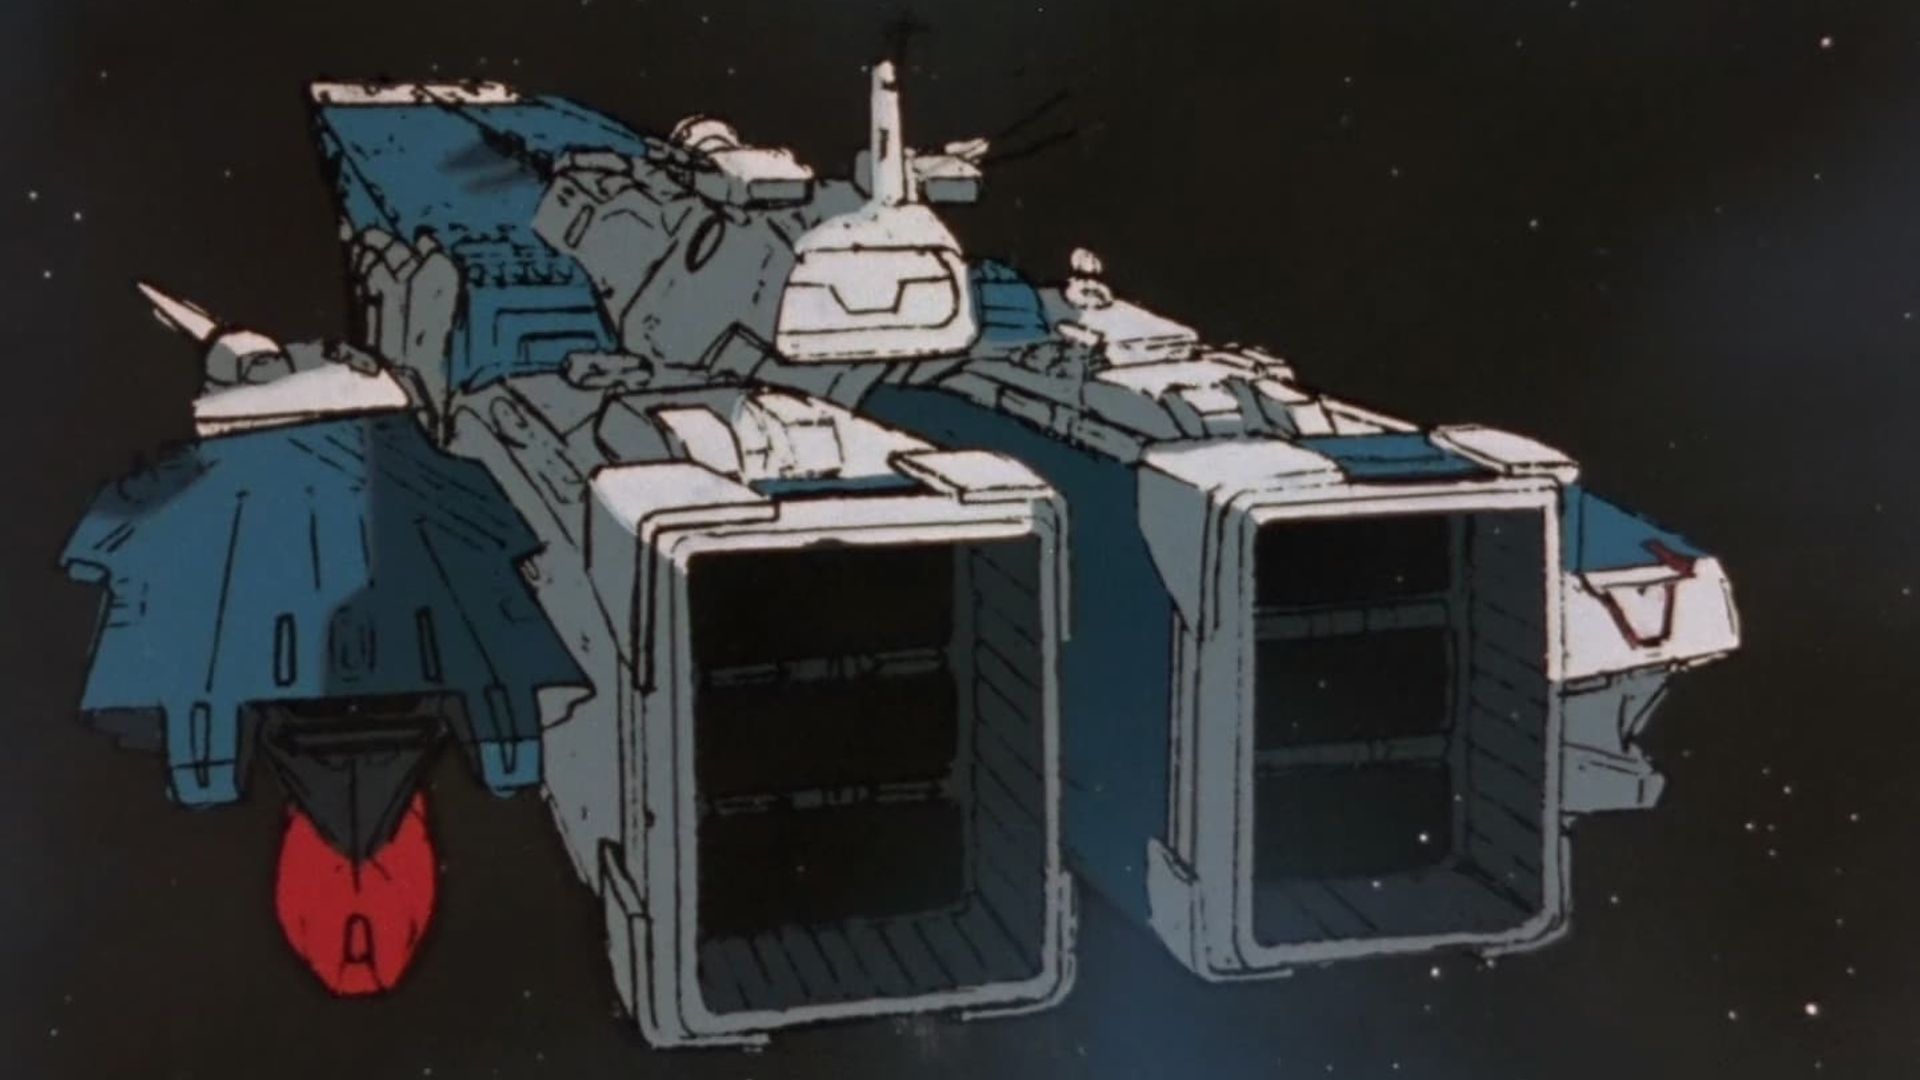 Super Dimension Fortress Macross background